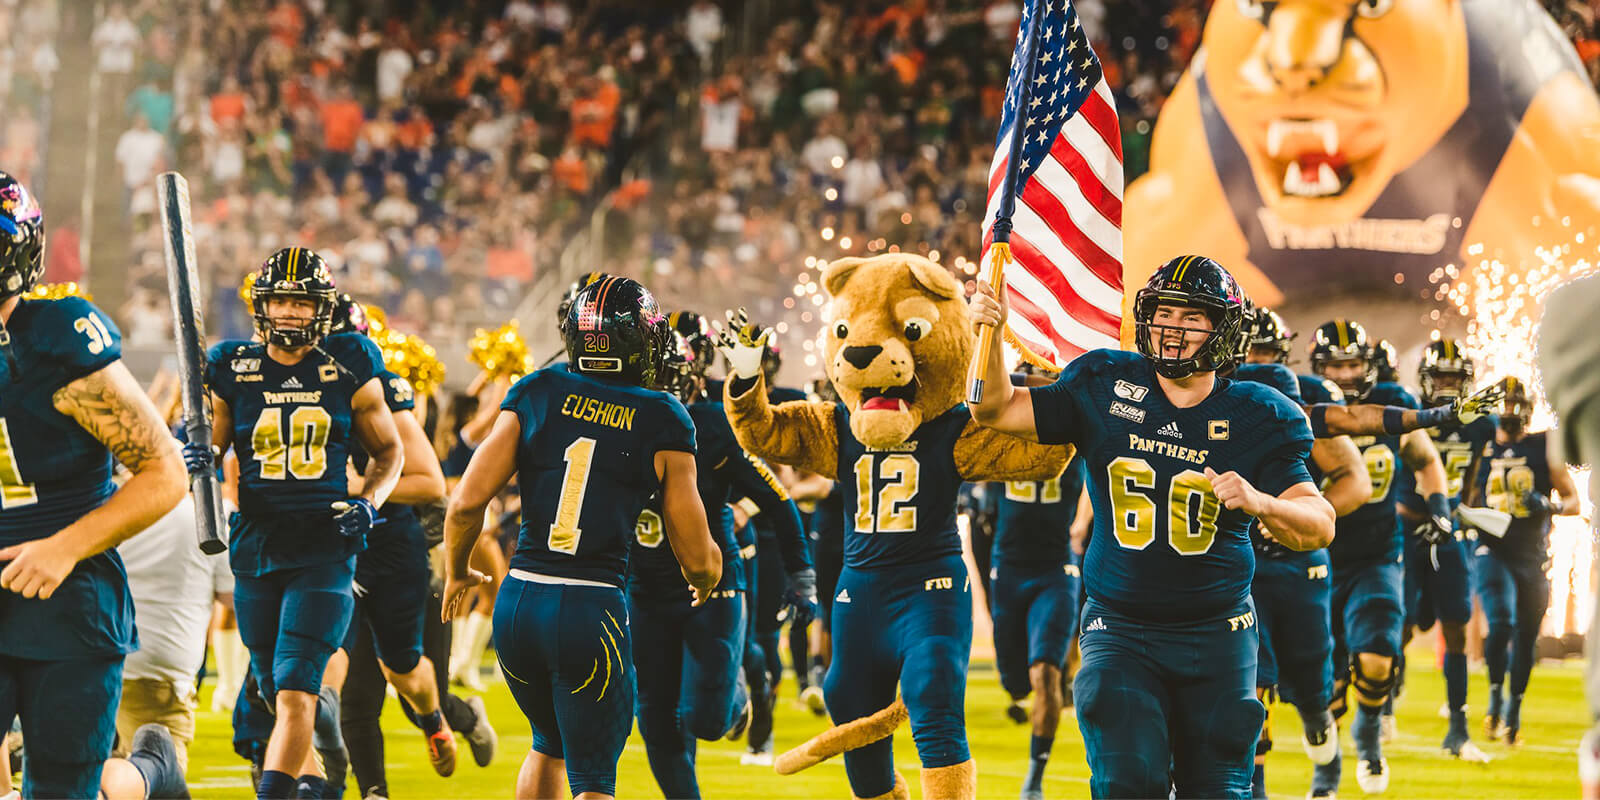 FIU football team running down the stadium holding an American flag prior to a match beginning. 